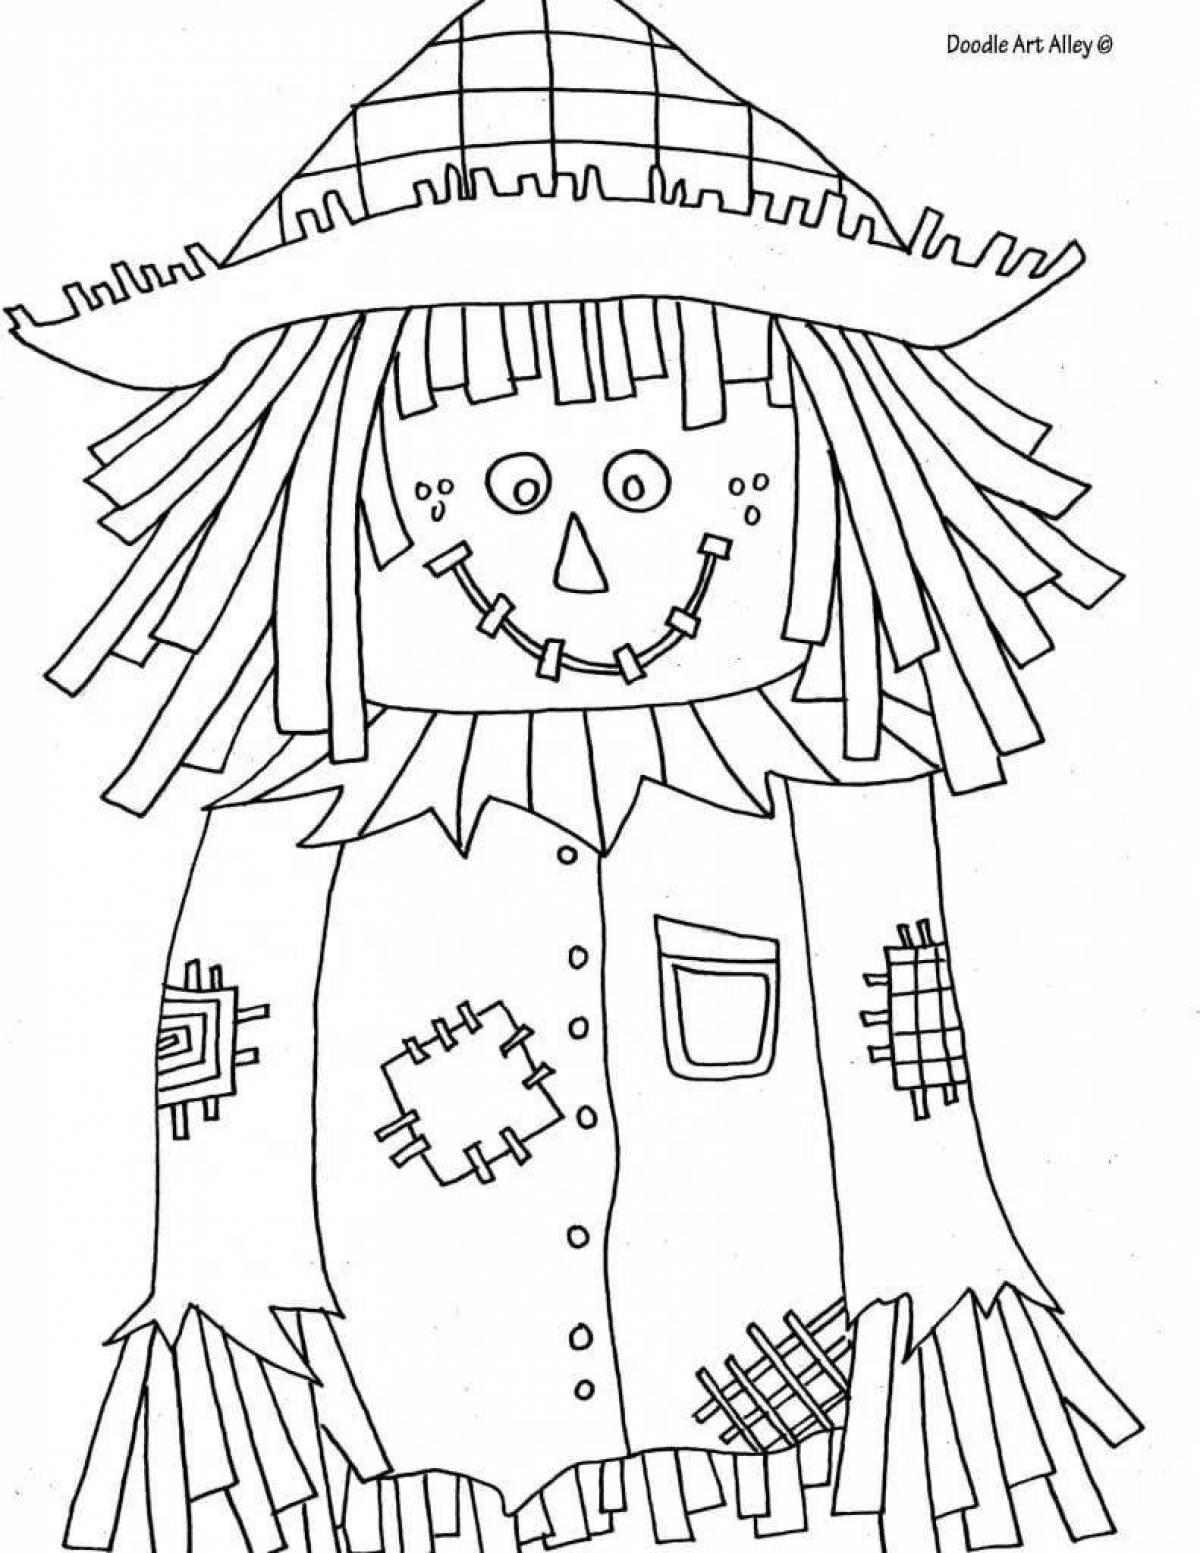 Freakish scarecrow coloring page